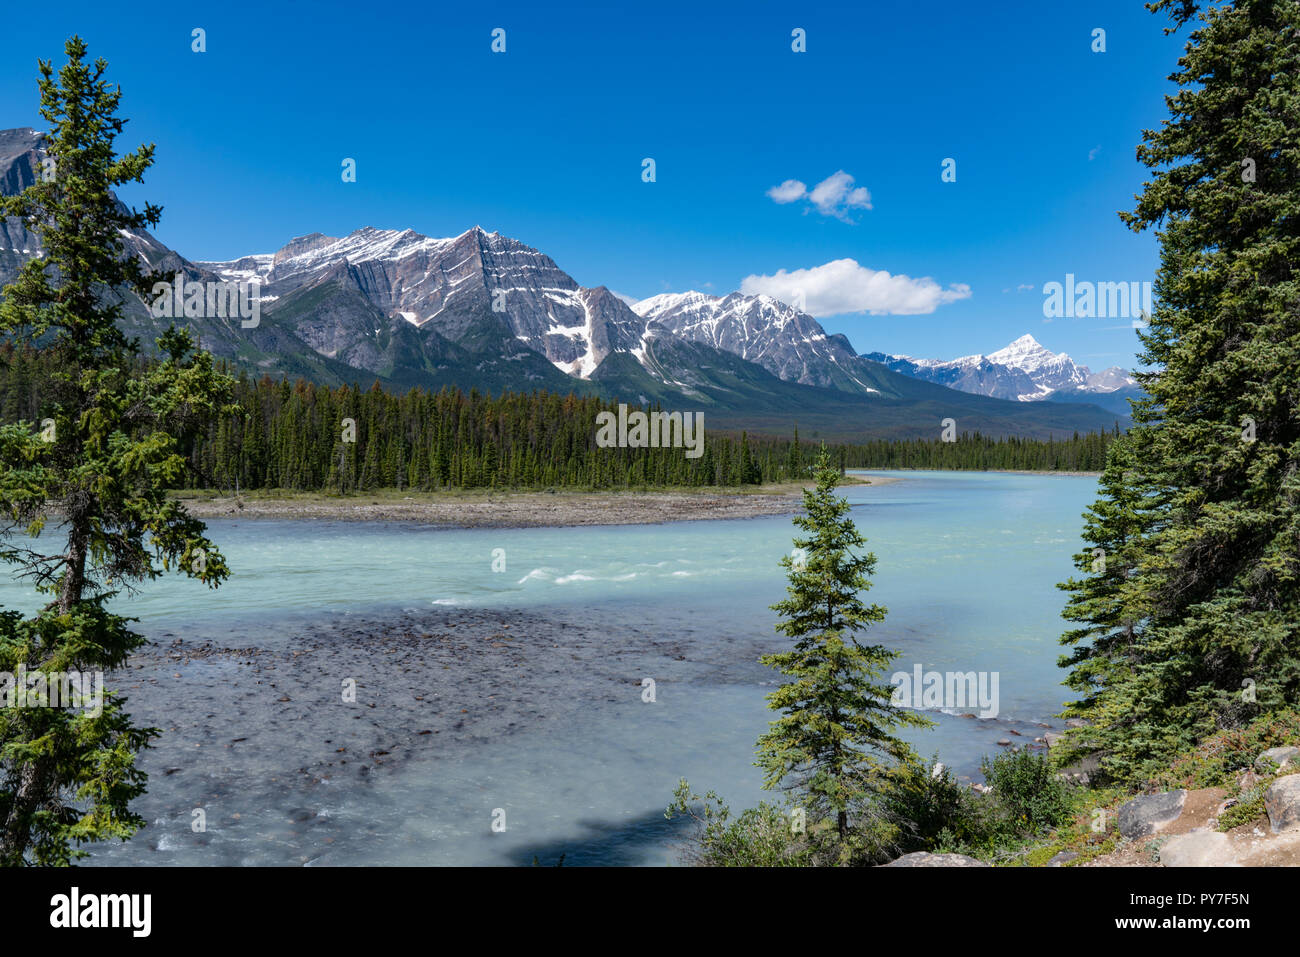 Along the turquoise water of the Bow River in Jasper National Park, Alberta, Canada Stock Photo